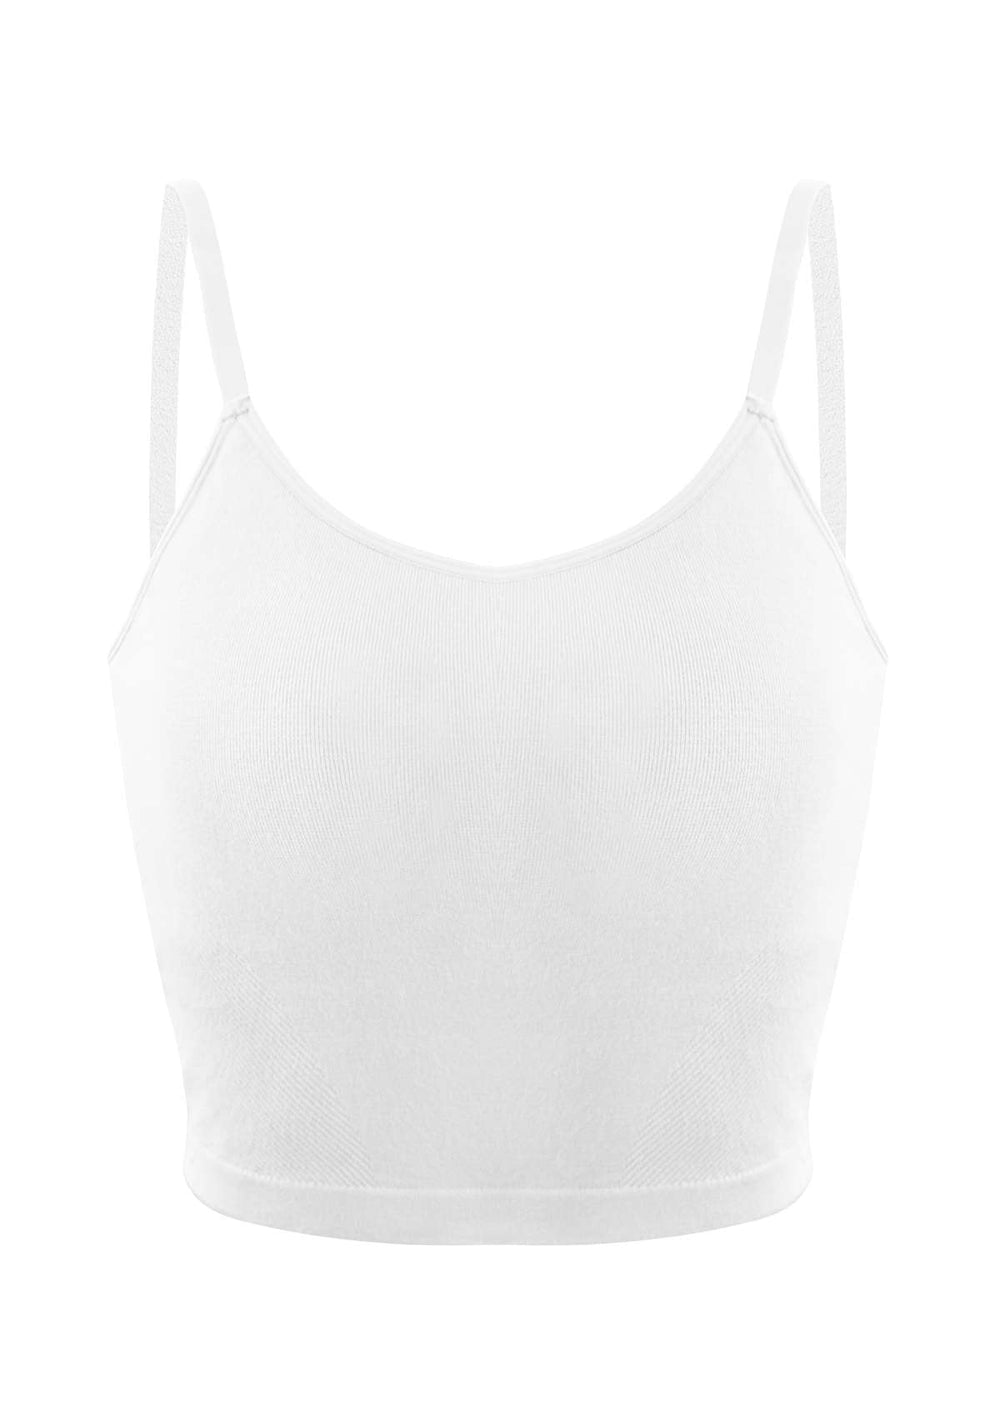 Yhjkvl Women's Yoga Tops Womens Yoga Tops Workouts Clothes Tank